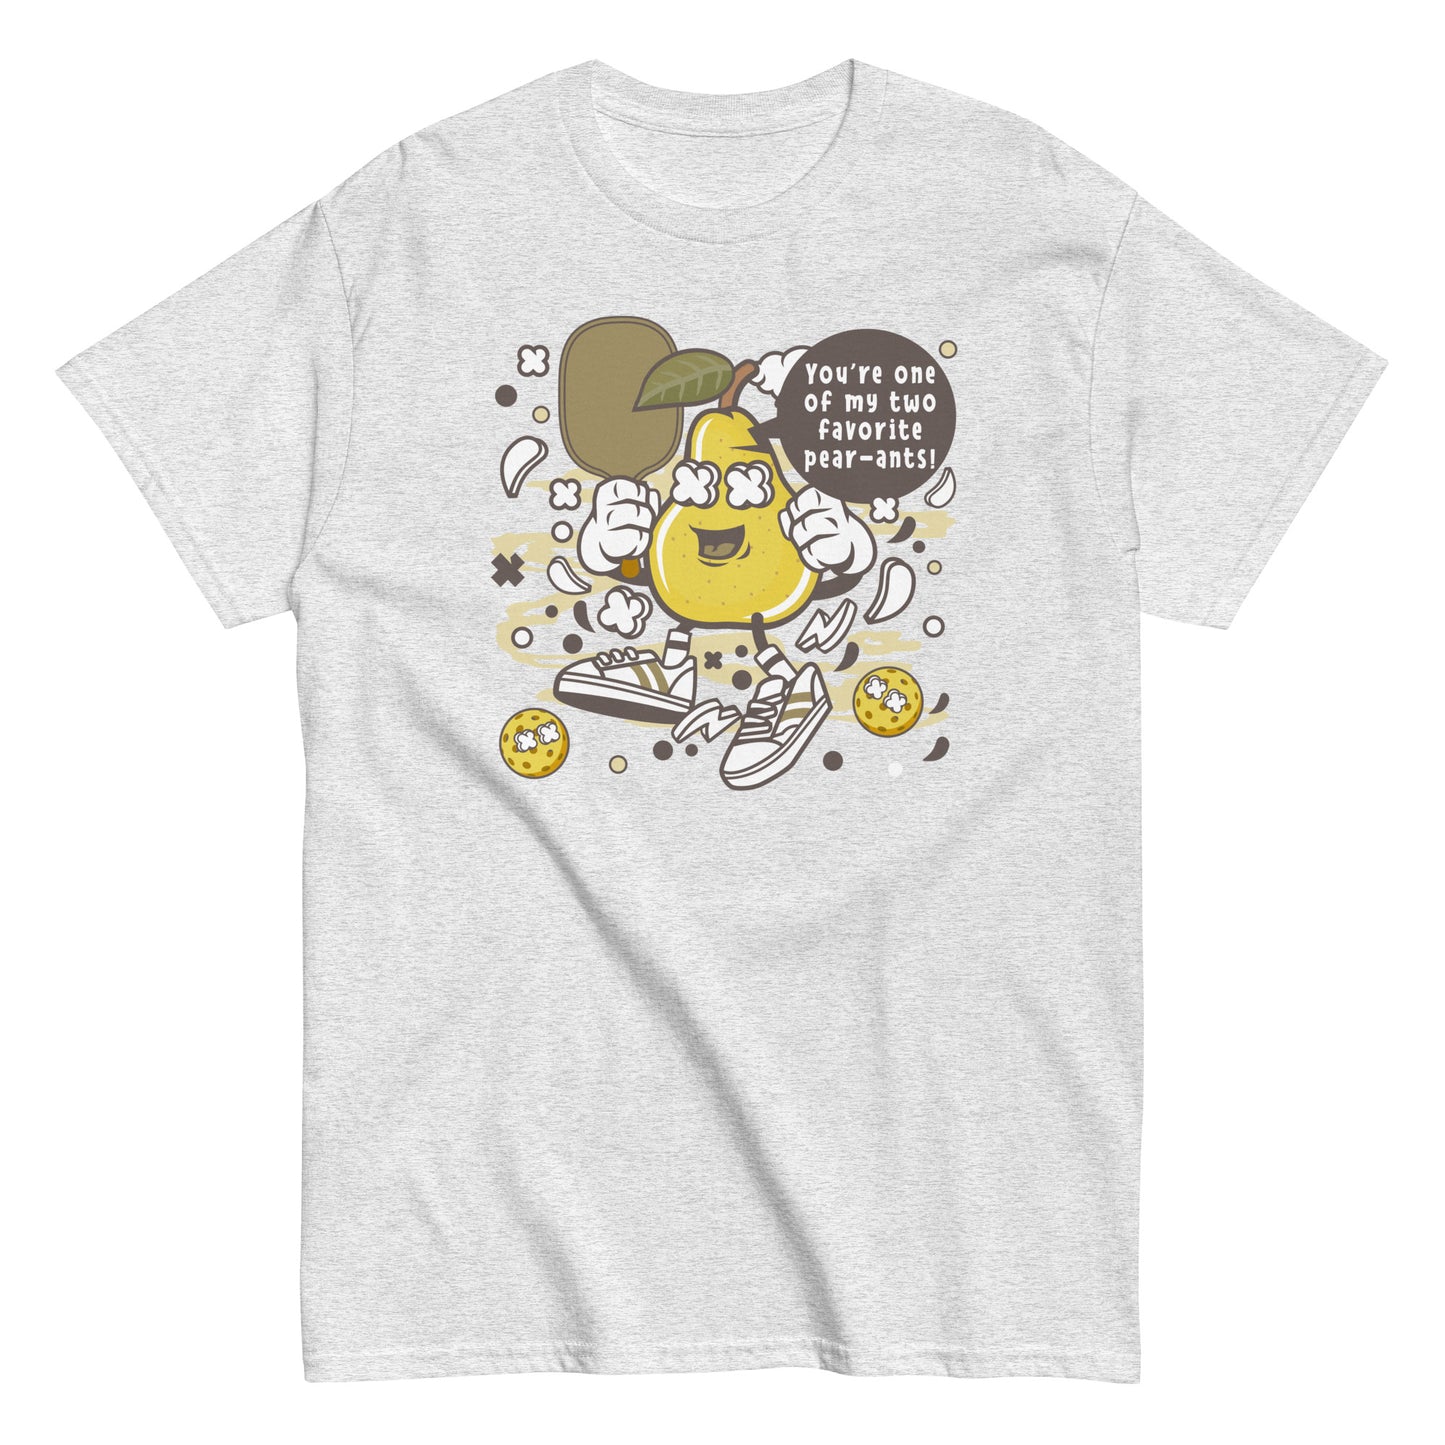 Retro Pickleball Pun: "Your One Of My Favorite Pear-Ants", Father's Day Mens Ash T-Shirt